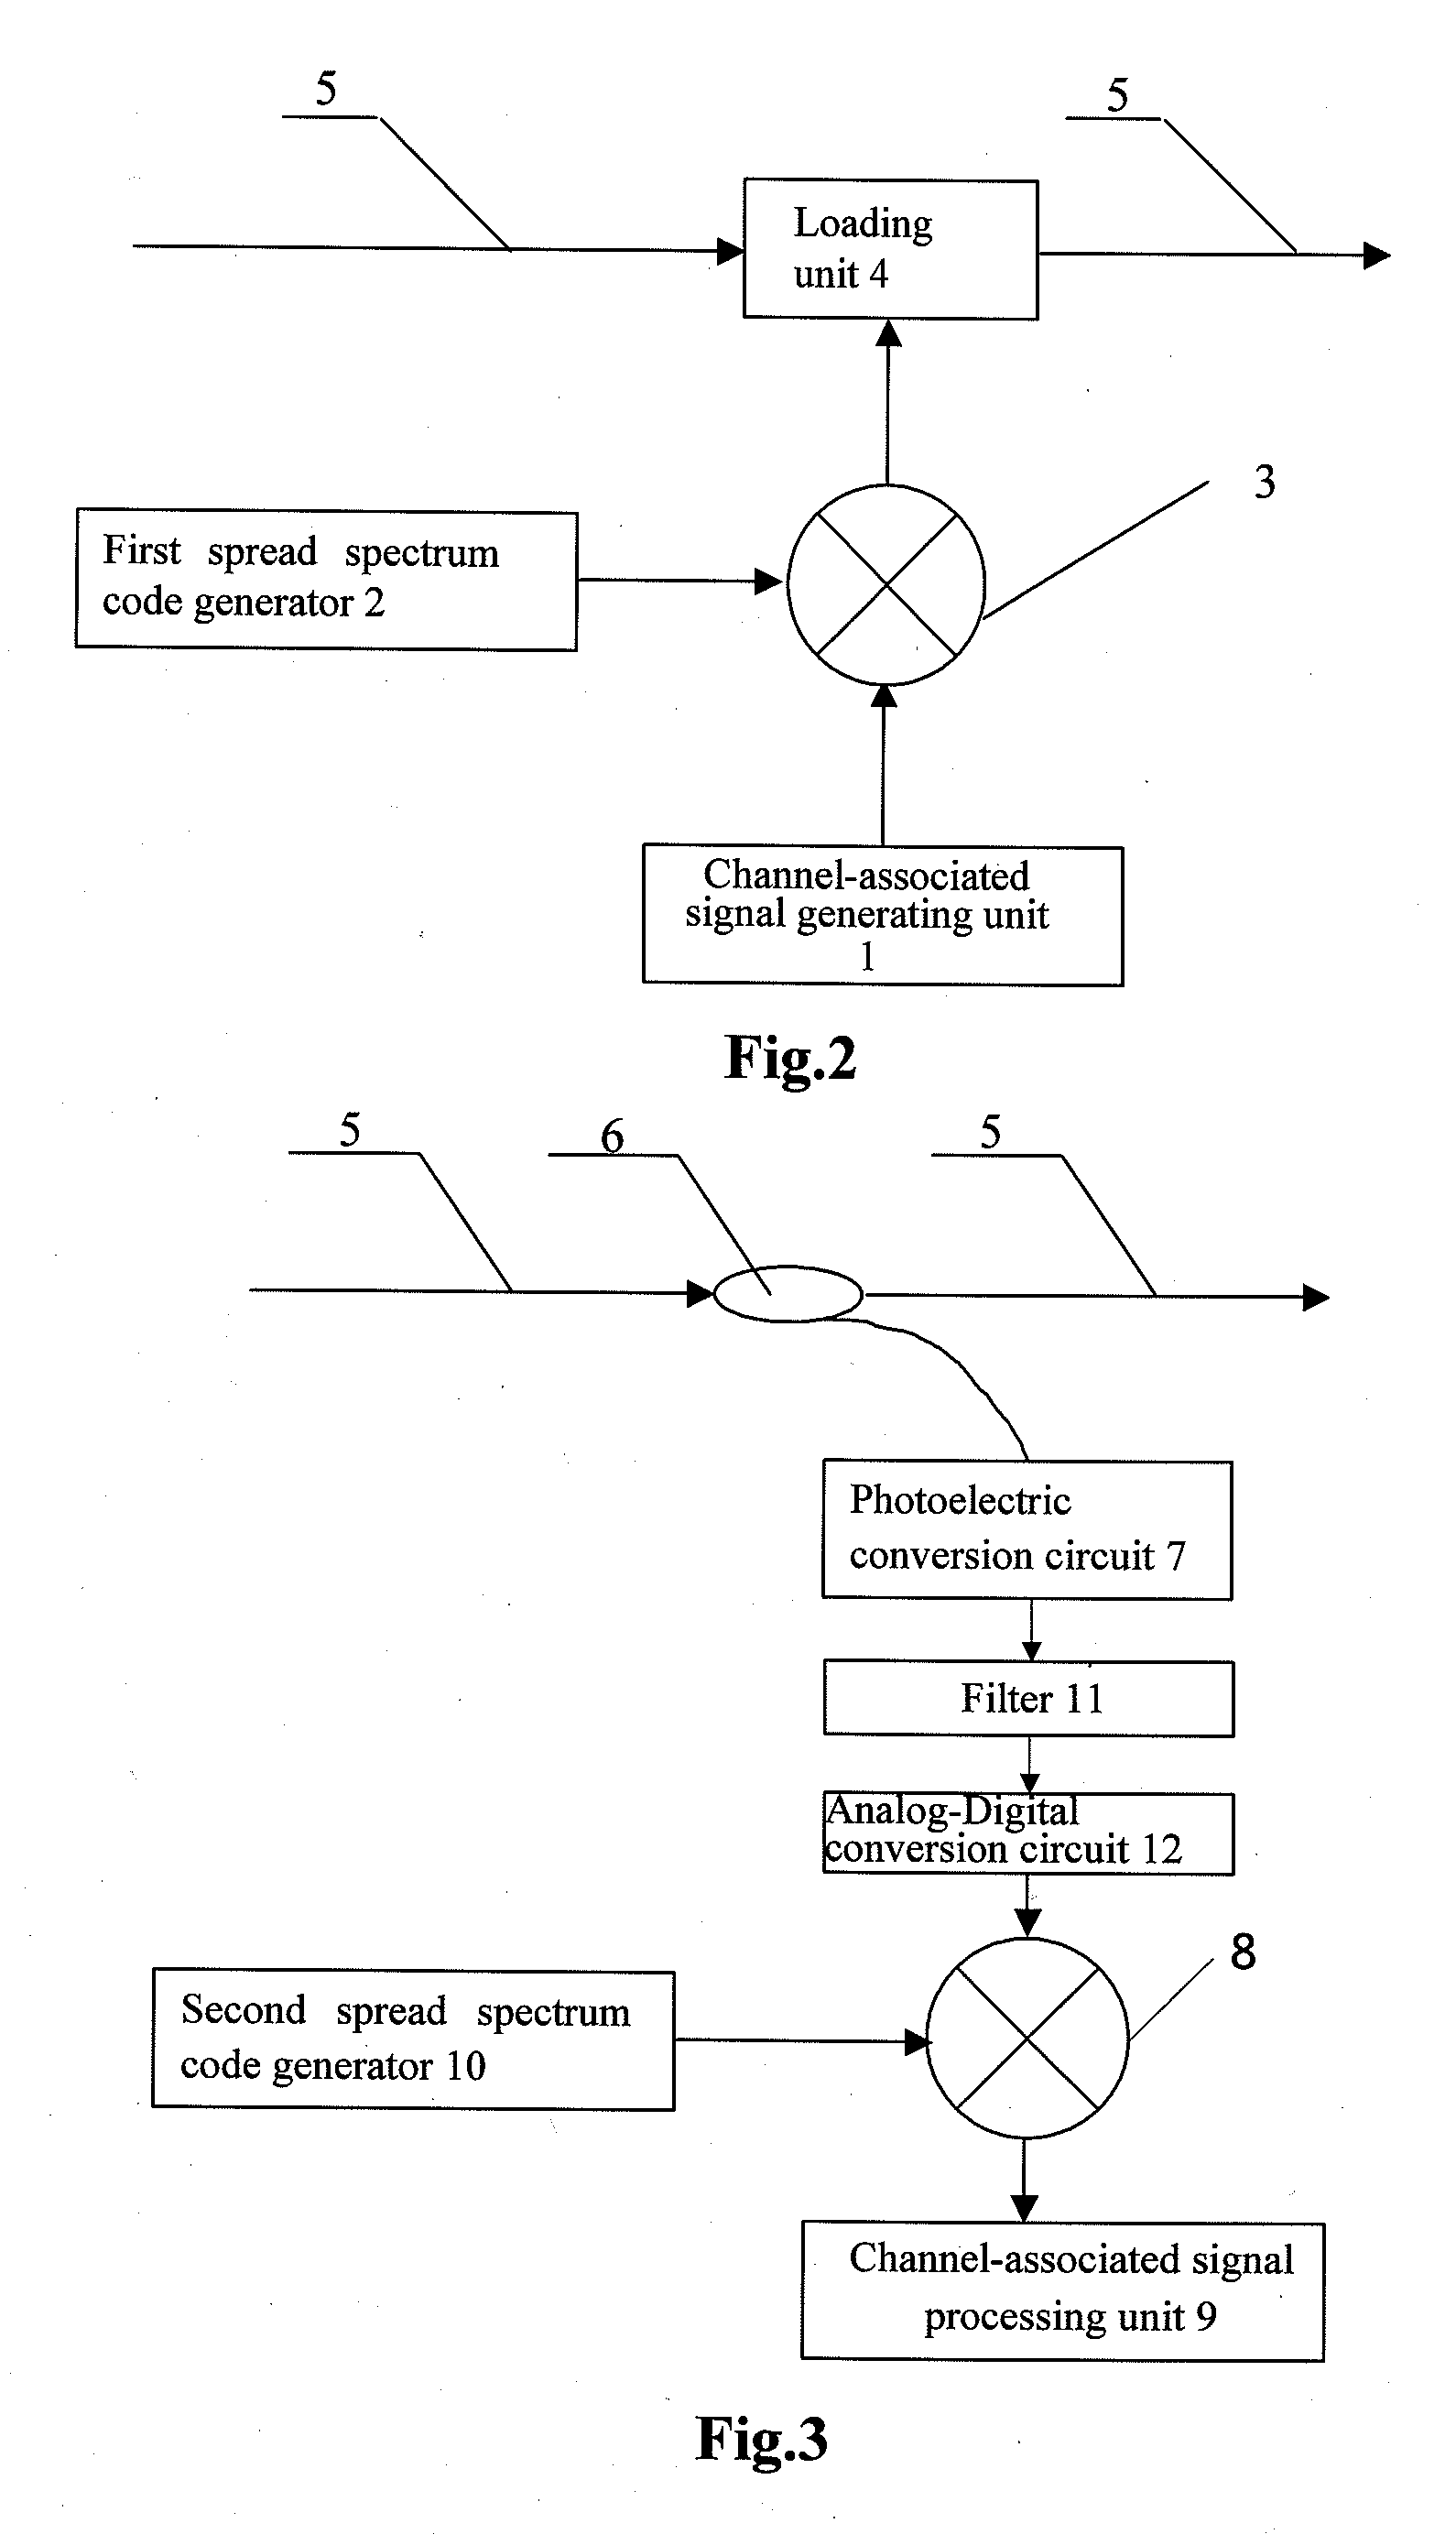 Method and apparatus for loading, detecting, and monitoring channel-associated optical signals